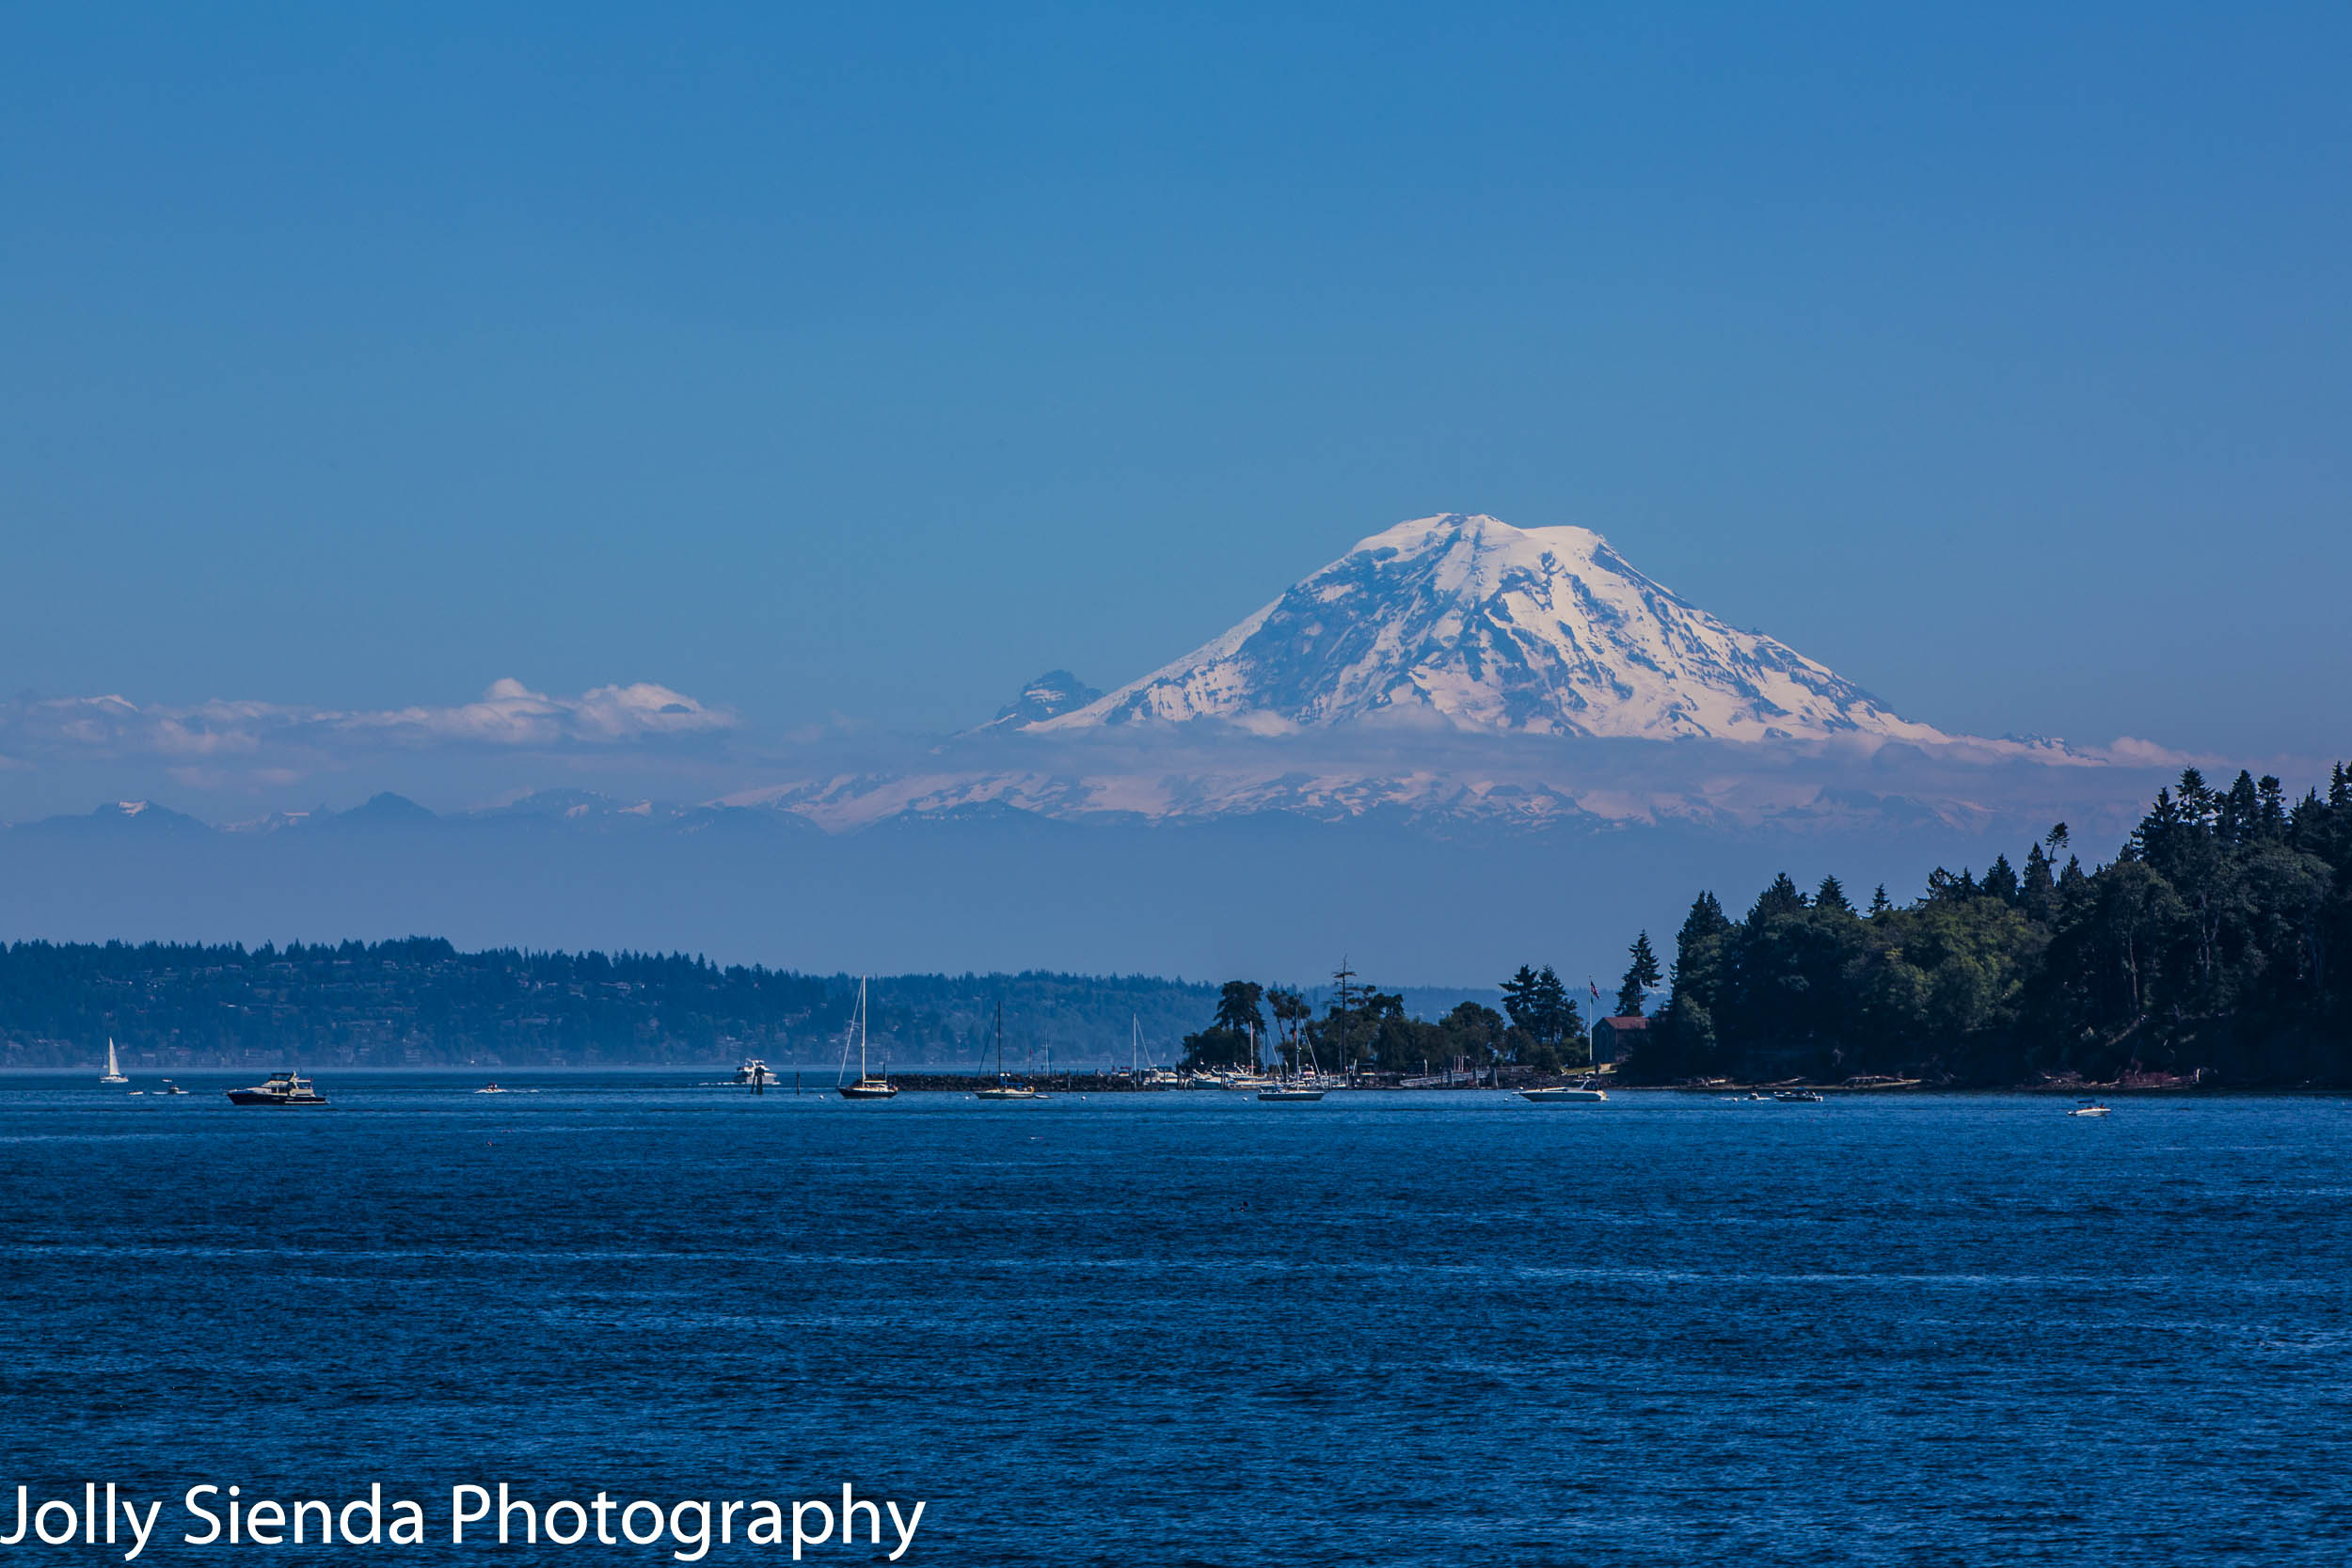 Mount Rainier with a cloud band towers over the Puget Sound and 